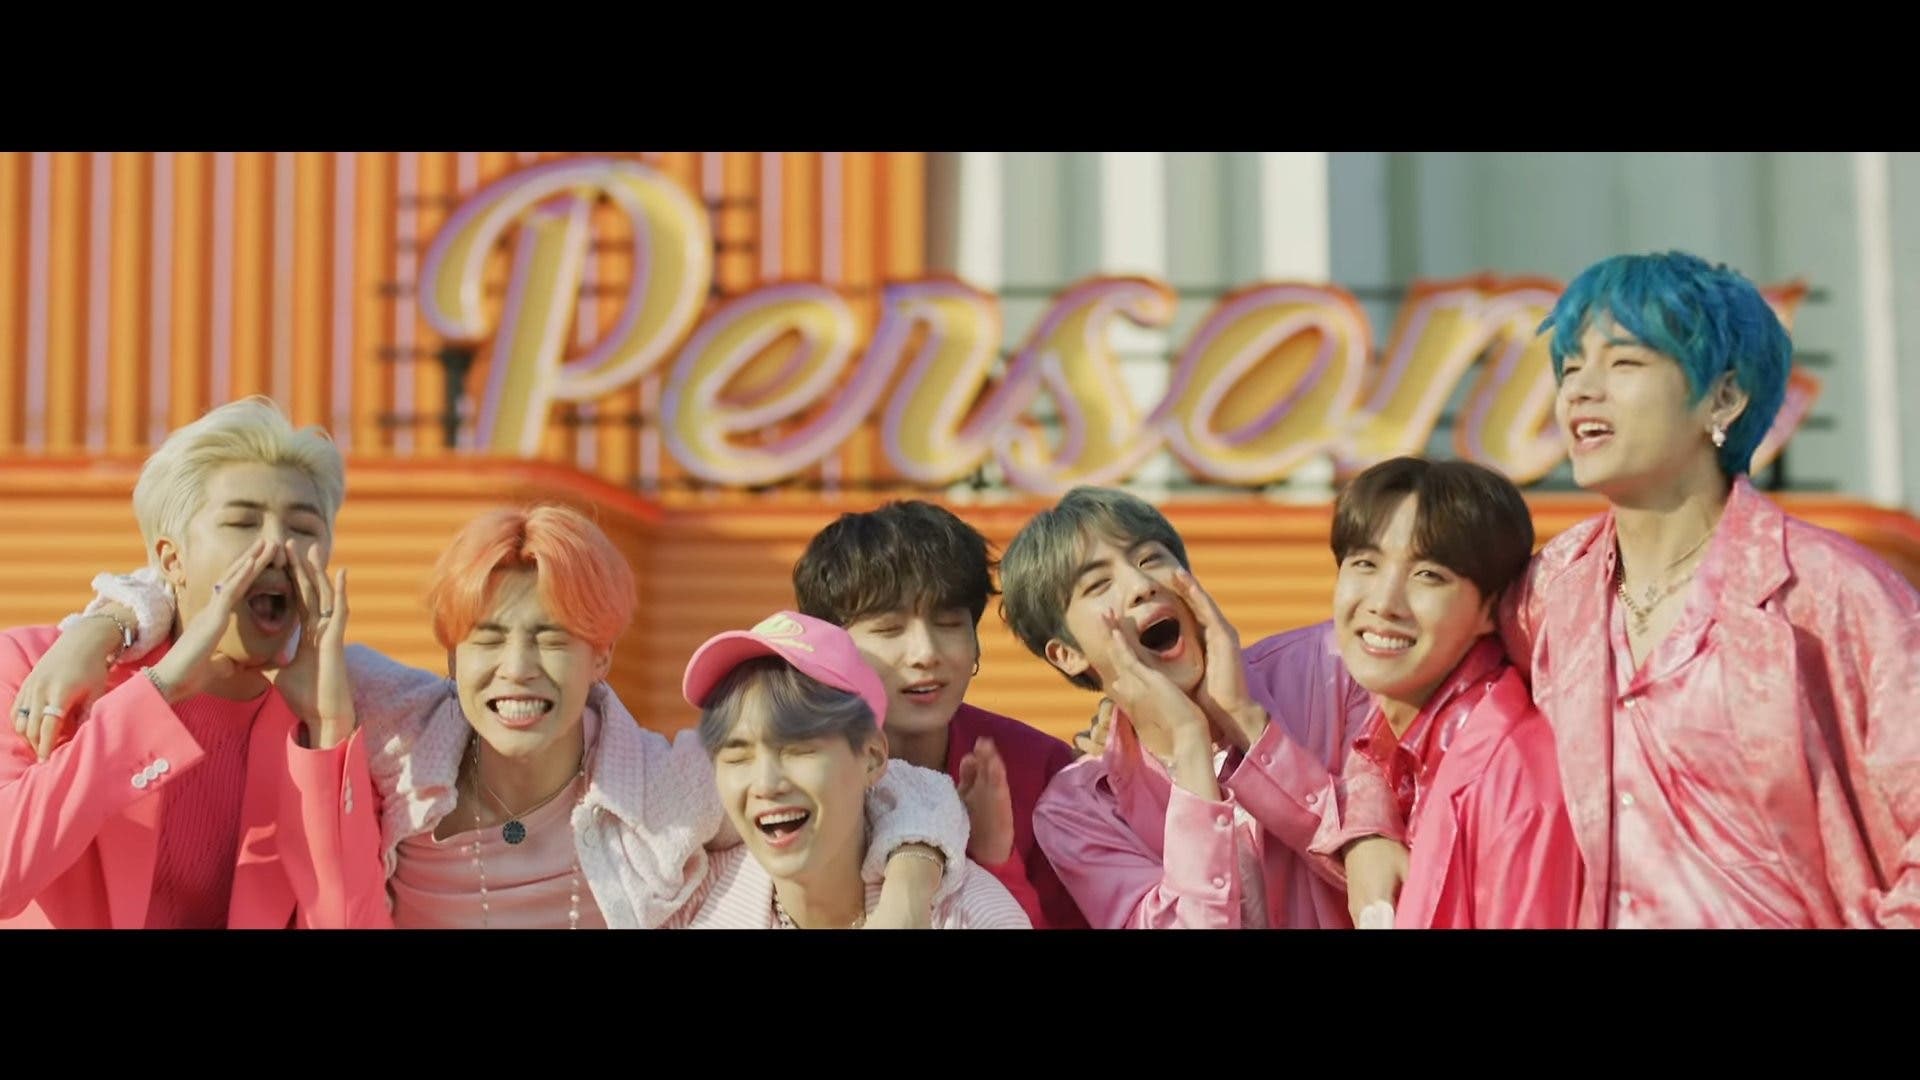 BTS' J-Hope's Blue Hair in "Boy With Luv" Music Video - wide 10